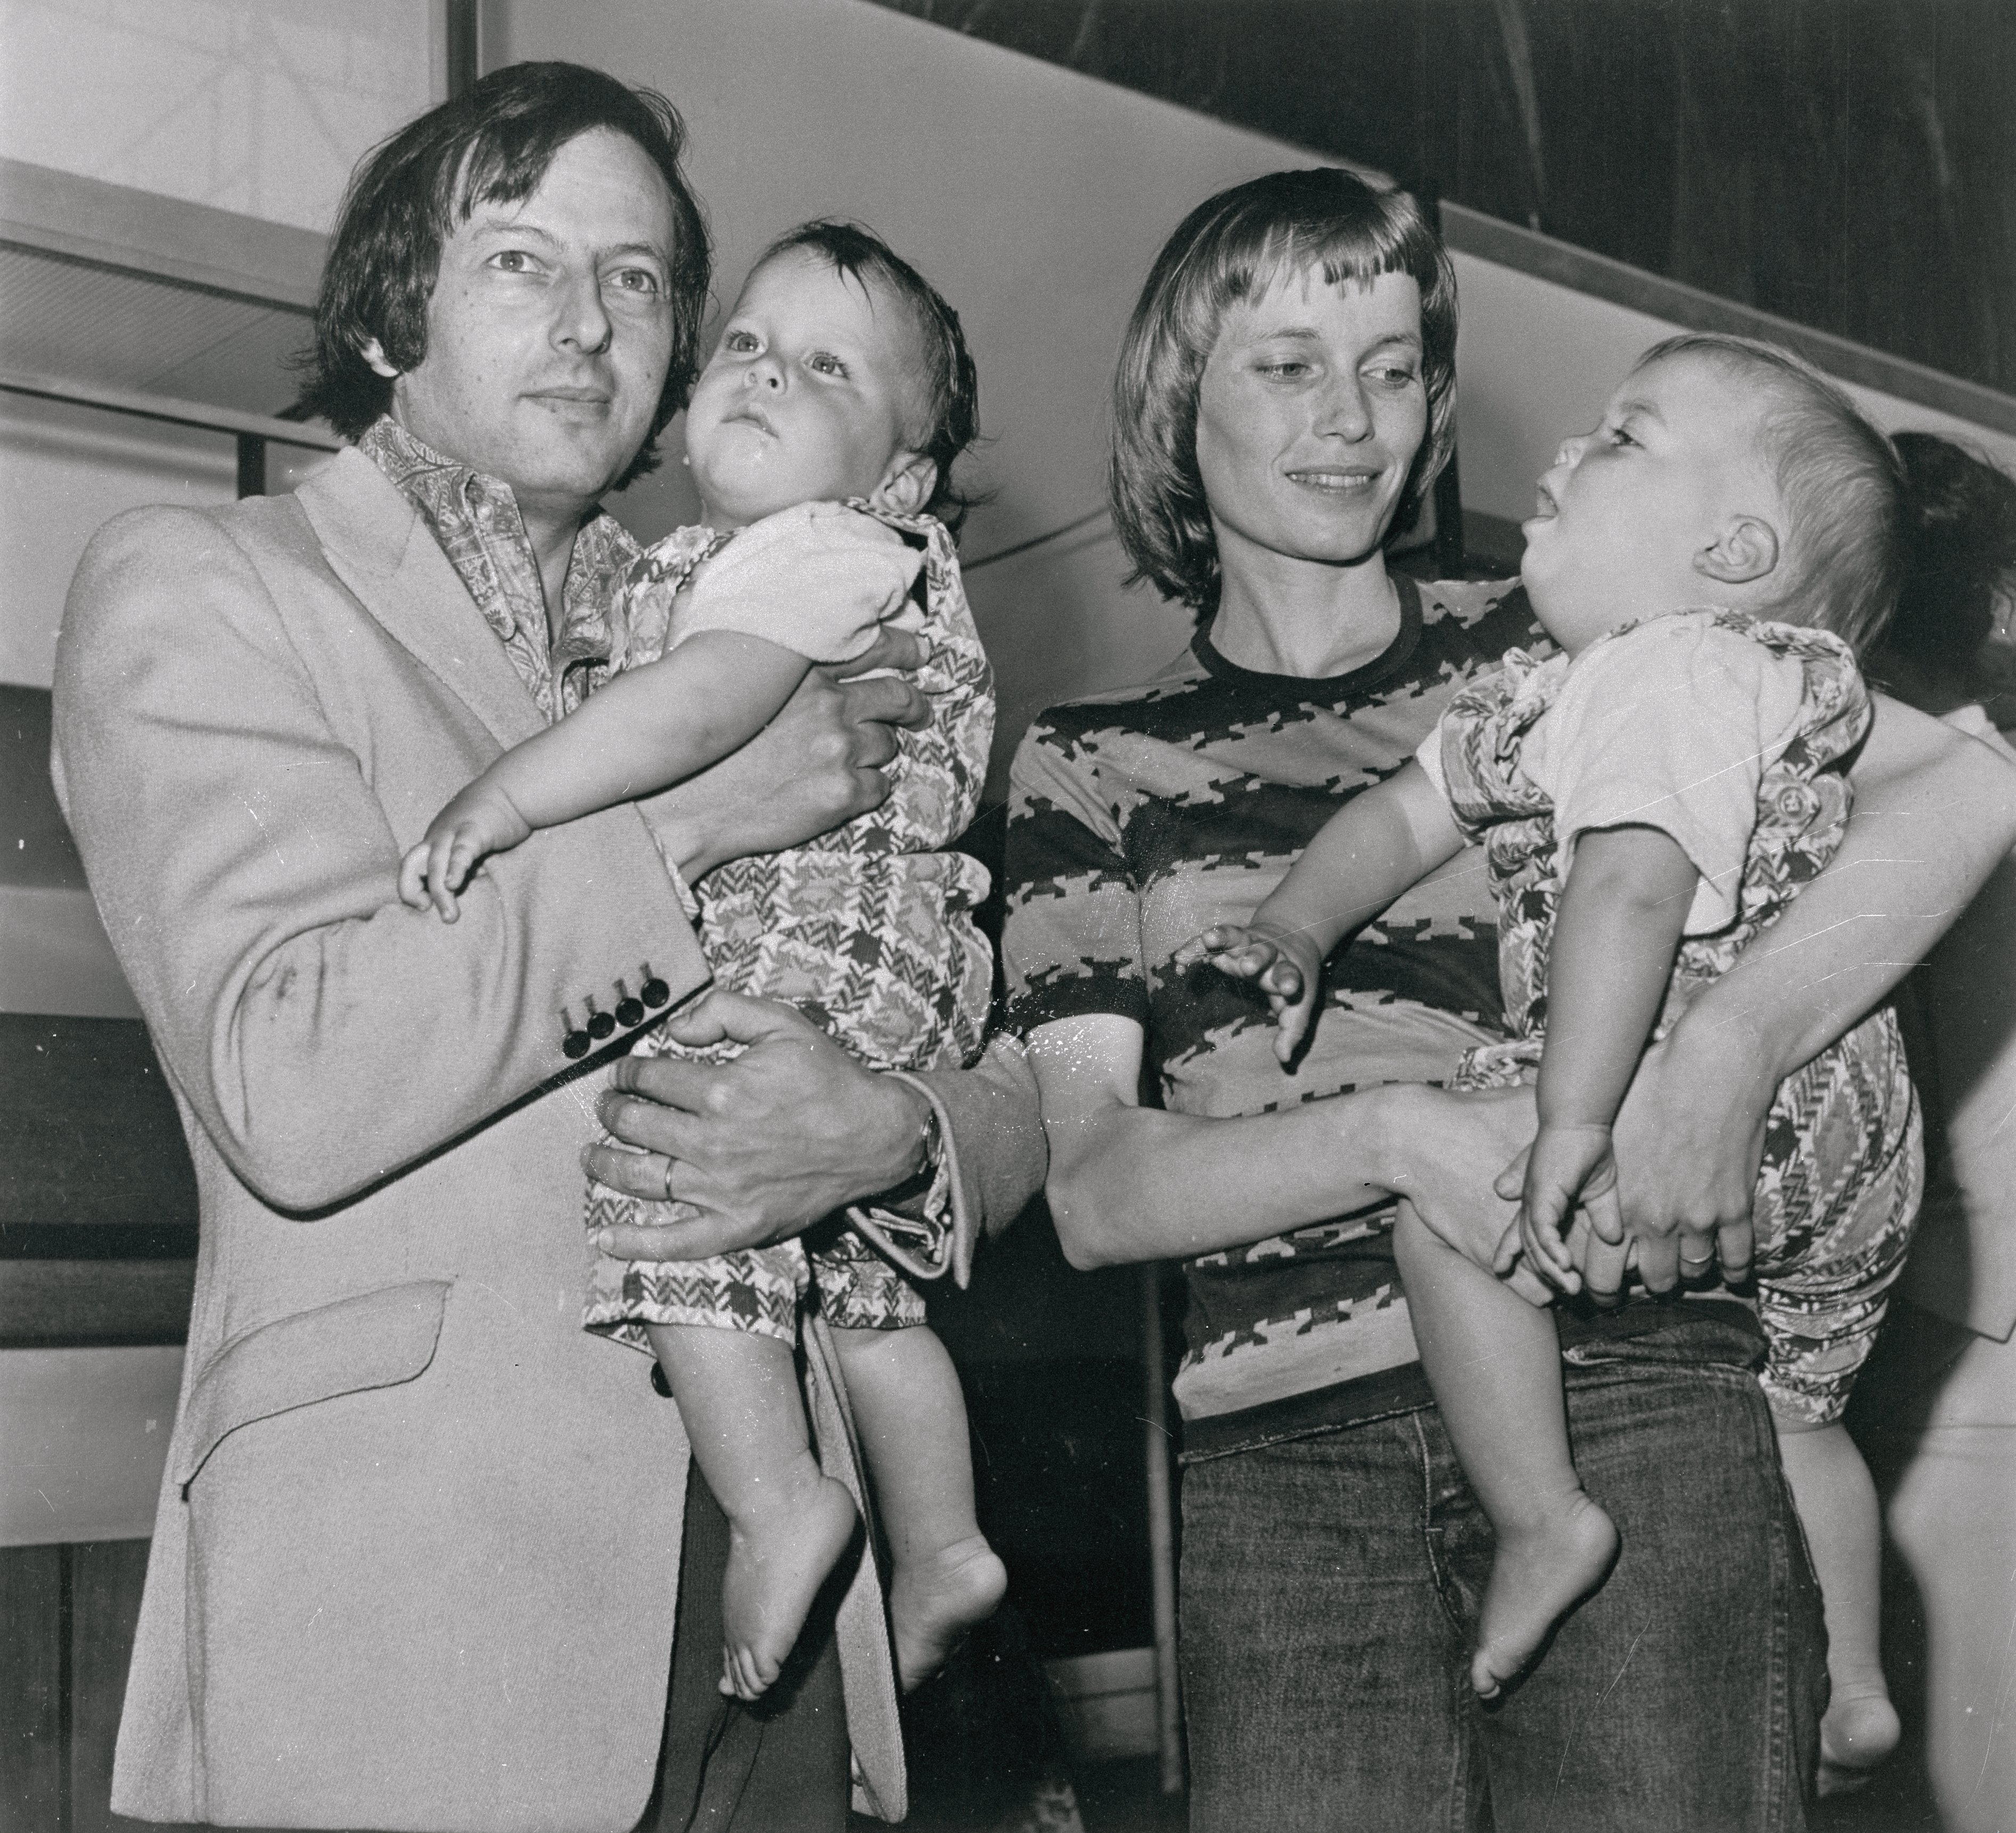  Andre Previn, Mia Farrow, and their twin sons, Matthew and Sascha in 1971. | Source: Getty Images